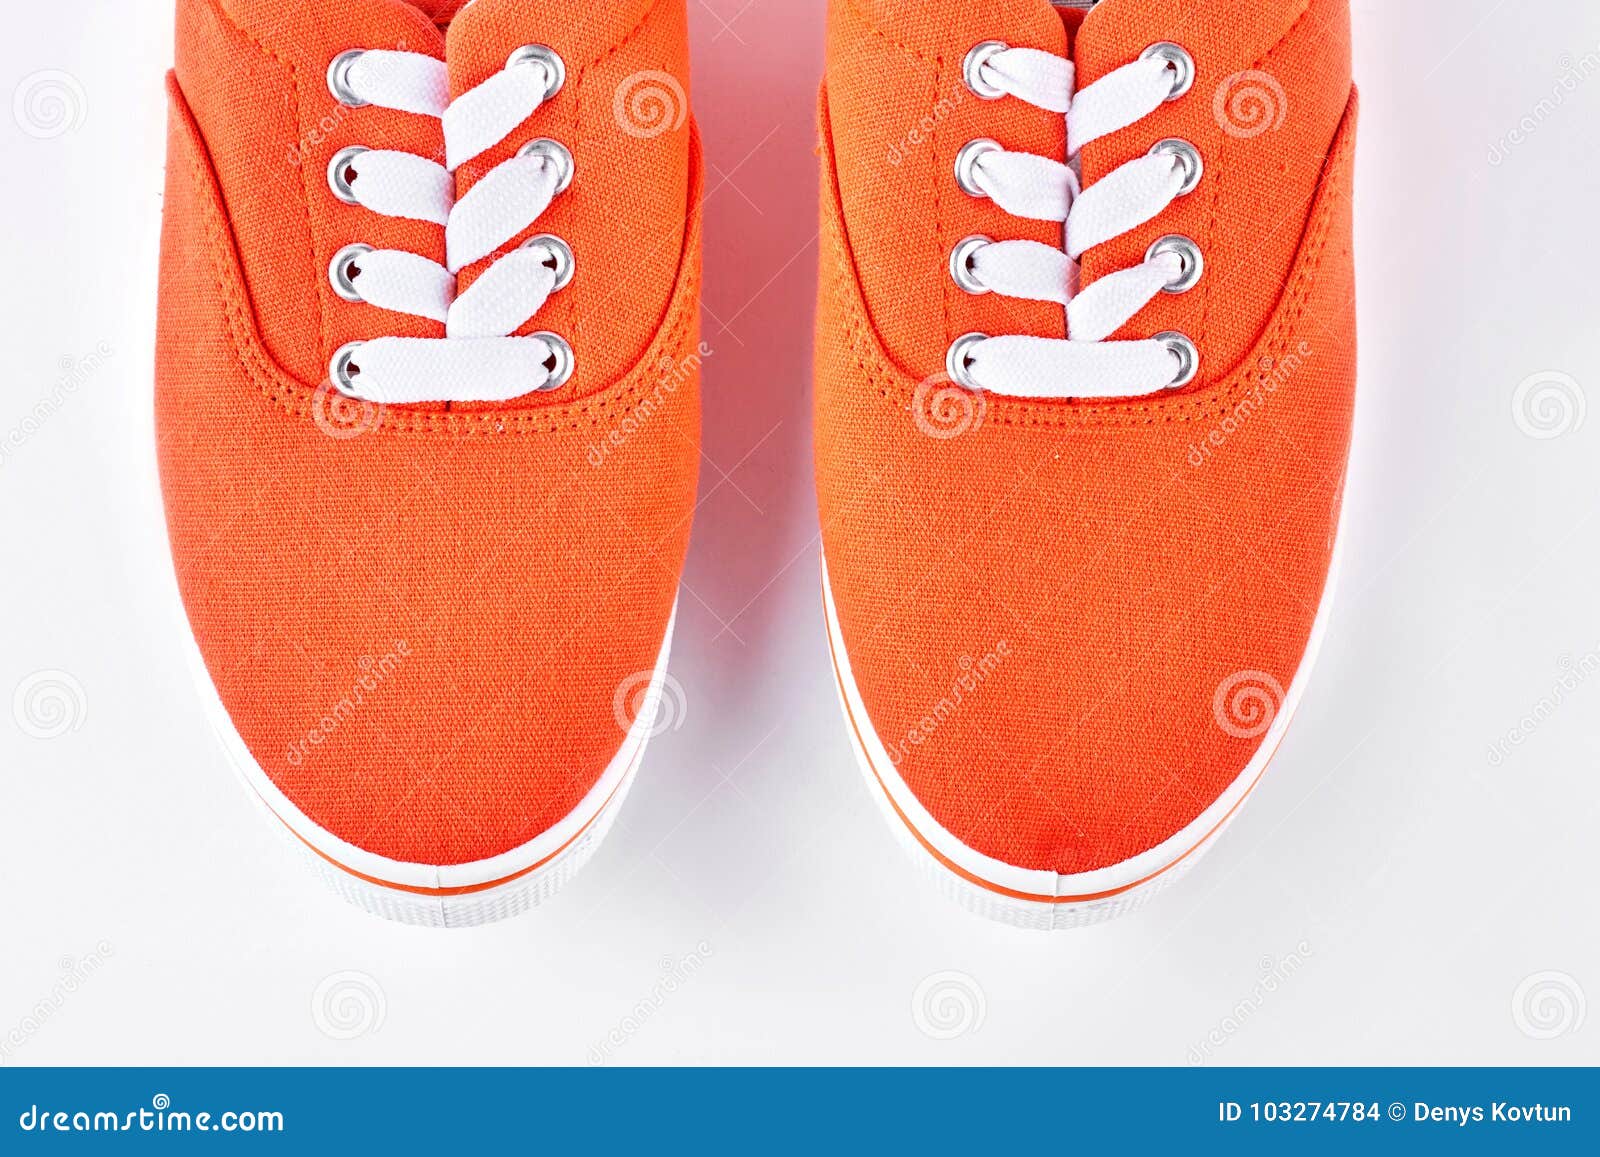 Pair of Orange Sneakers Close Up. Stock Photo - Image of path, gumshoes ...